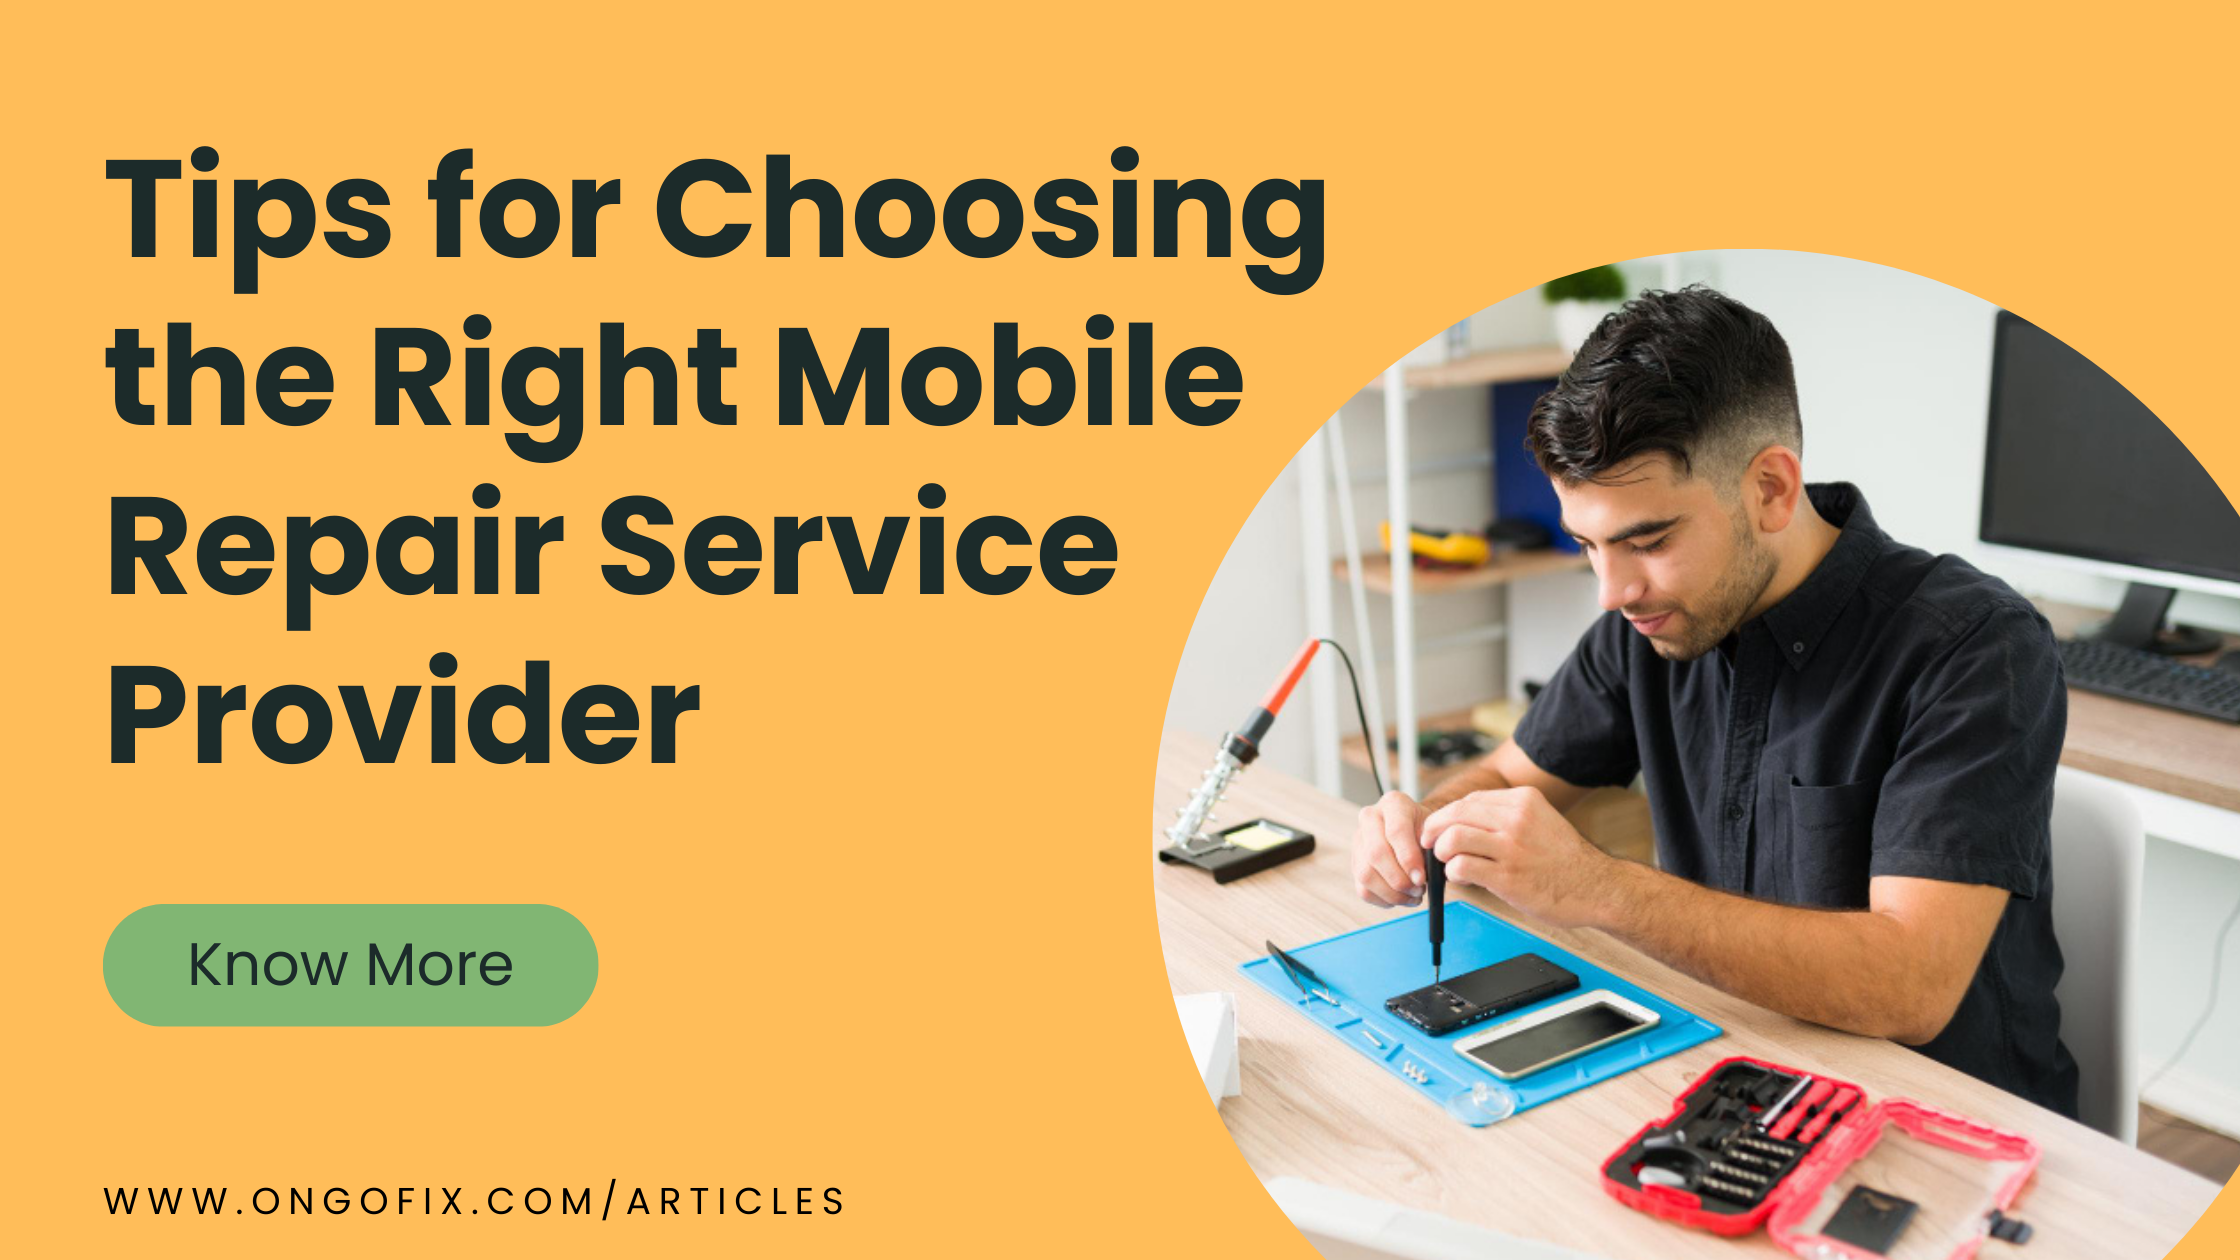 131581Tips for Choosing the Right Mobile Repair Service Provider.png